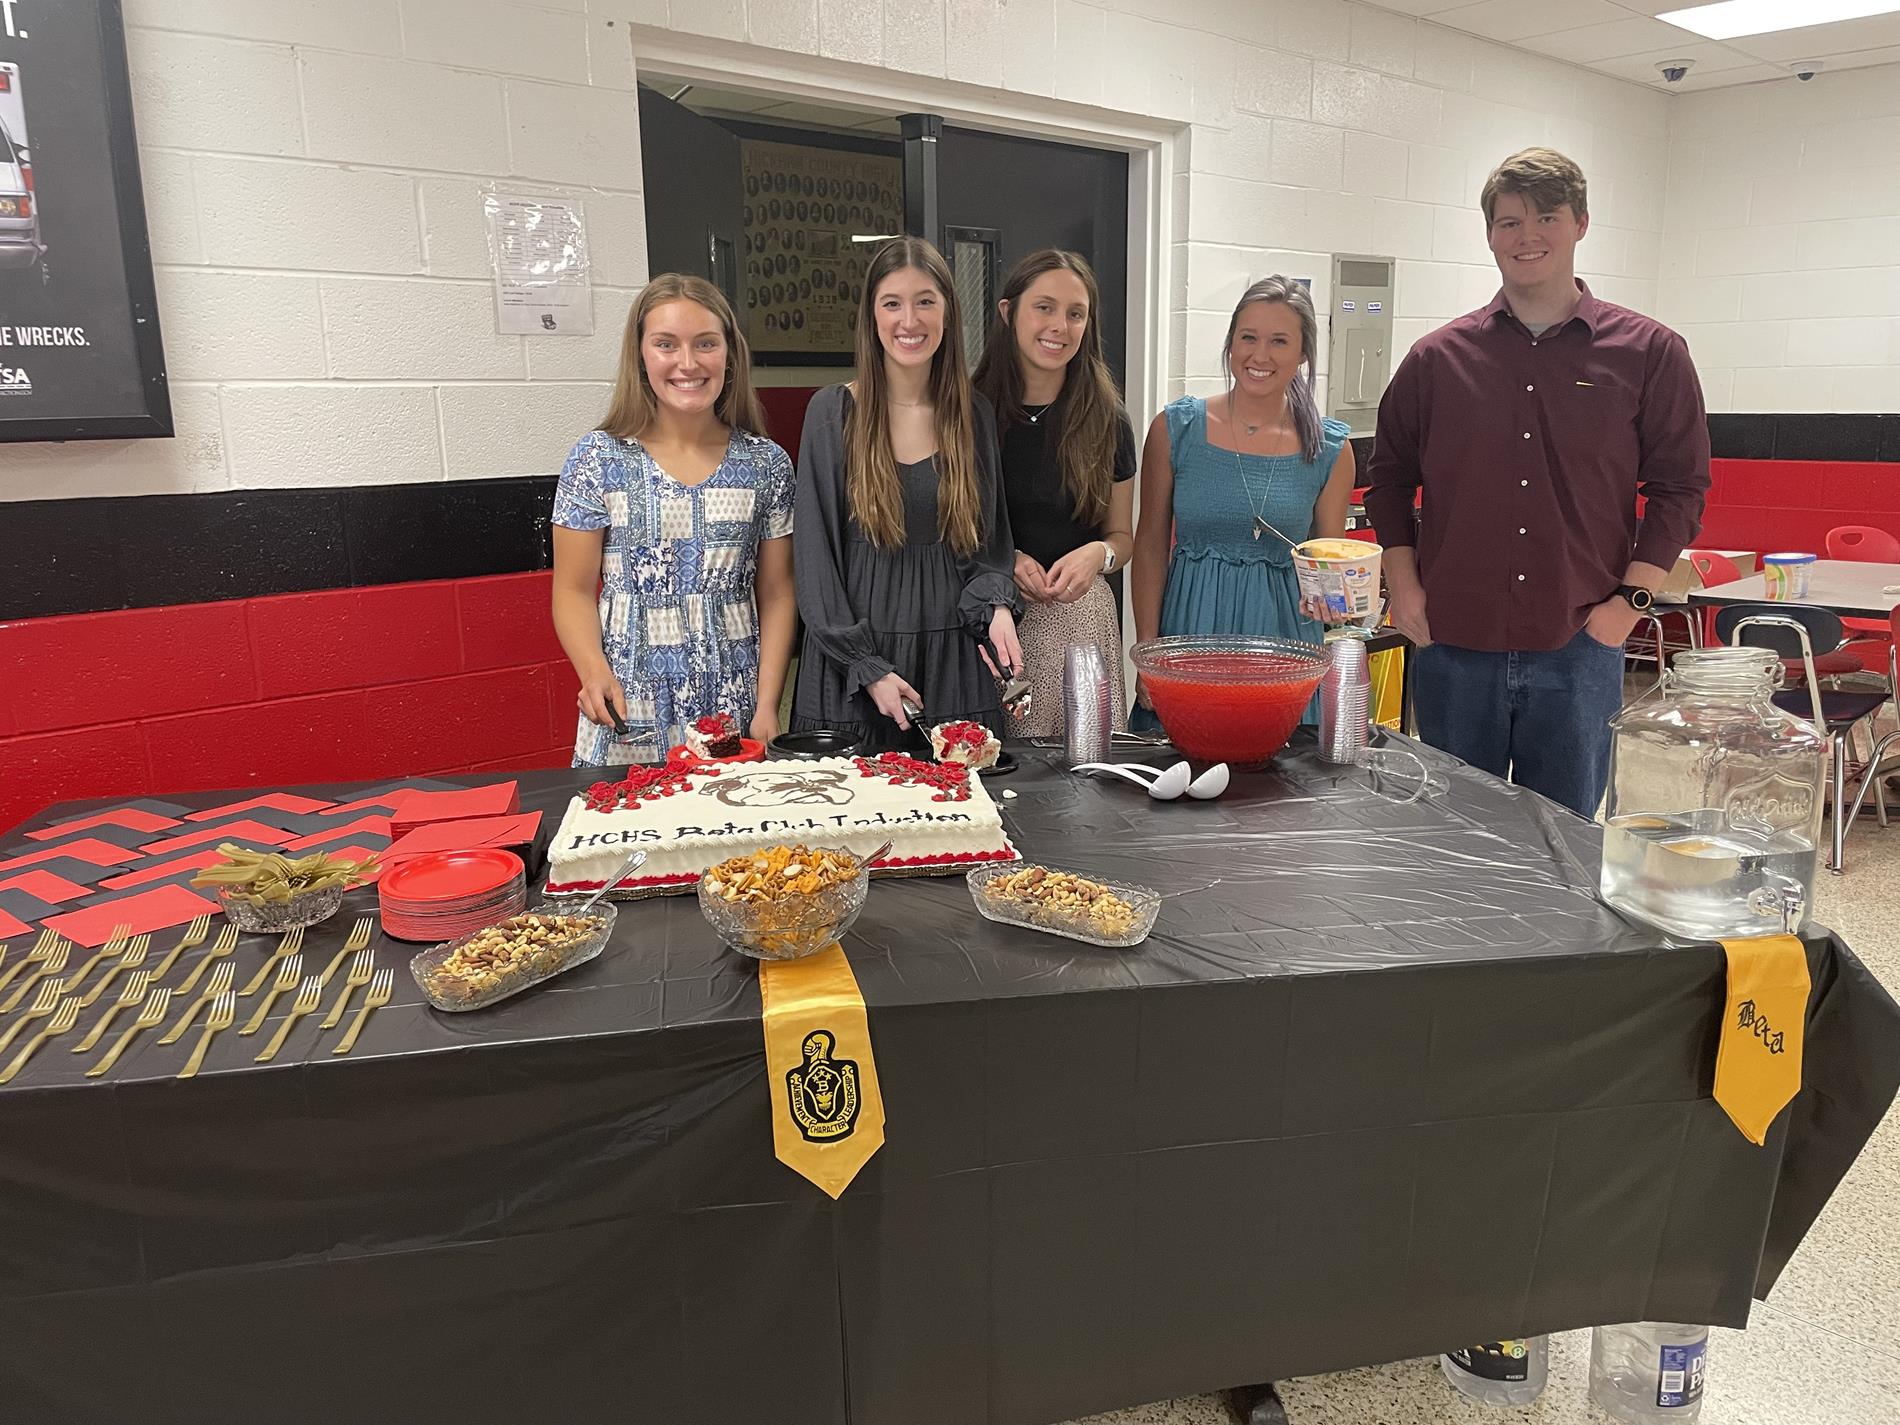 Existing Beta Club members serve refreshments at the Induction  Ceremony.